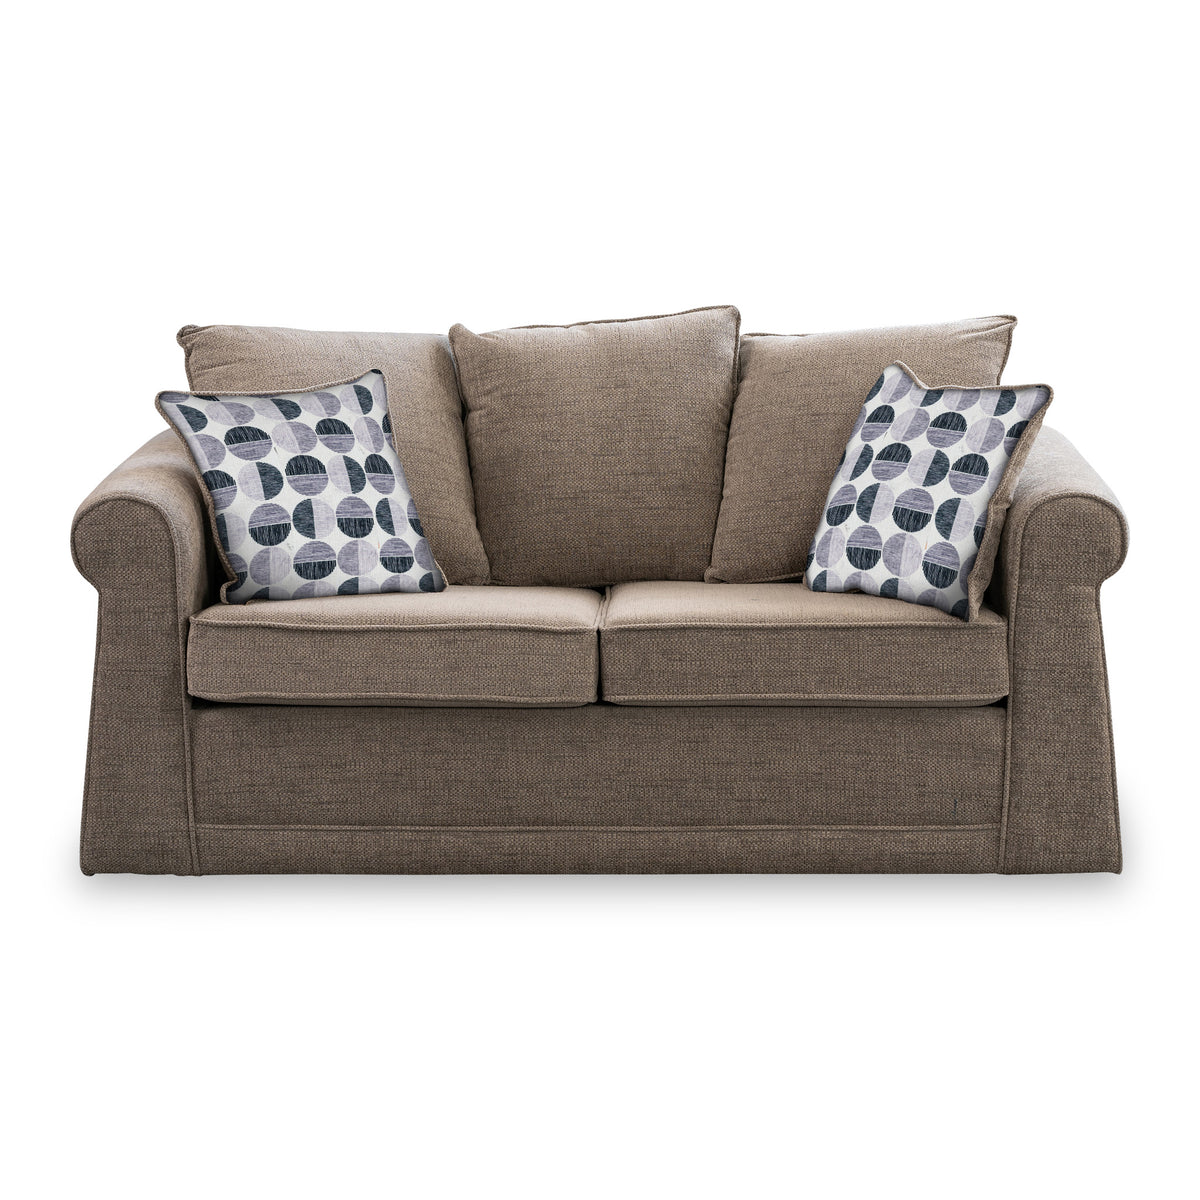 Branston Fawn Soft Weave 2 Seater Sofabed with Mono Scatter Cushions from Roseland Furniture